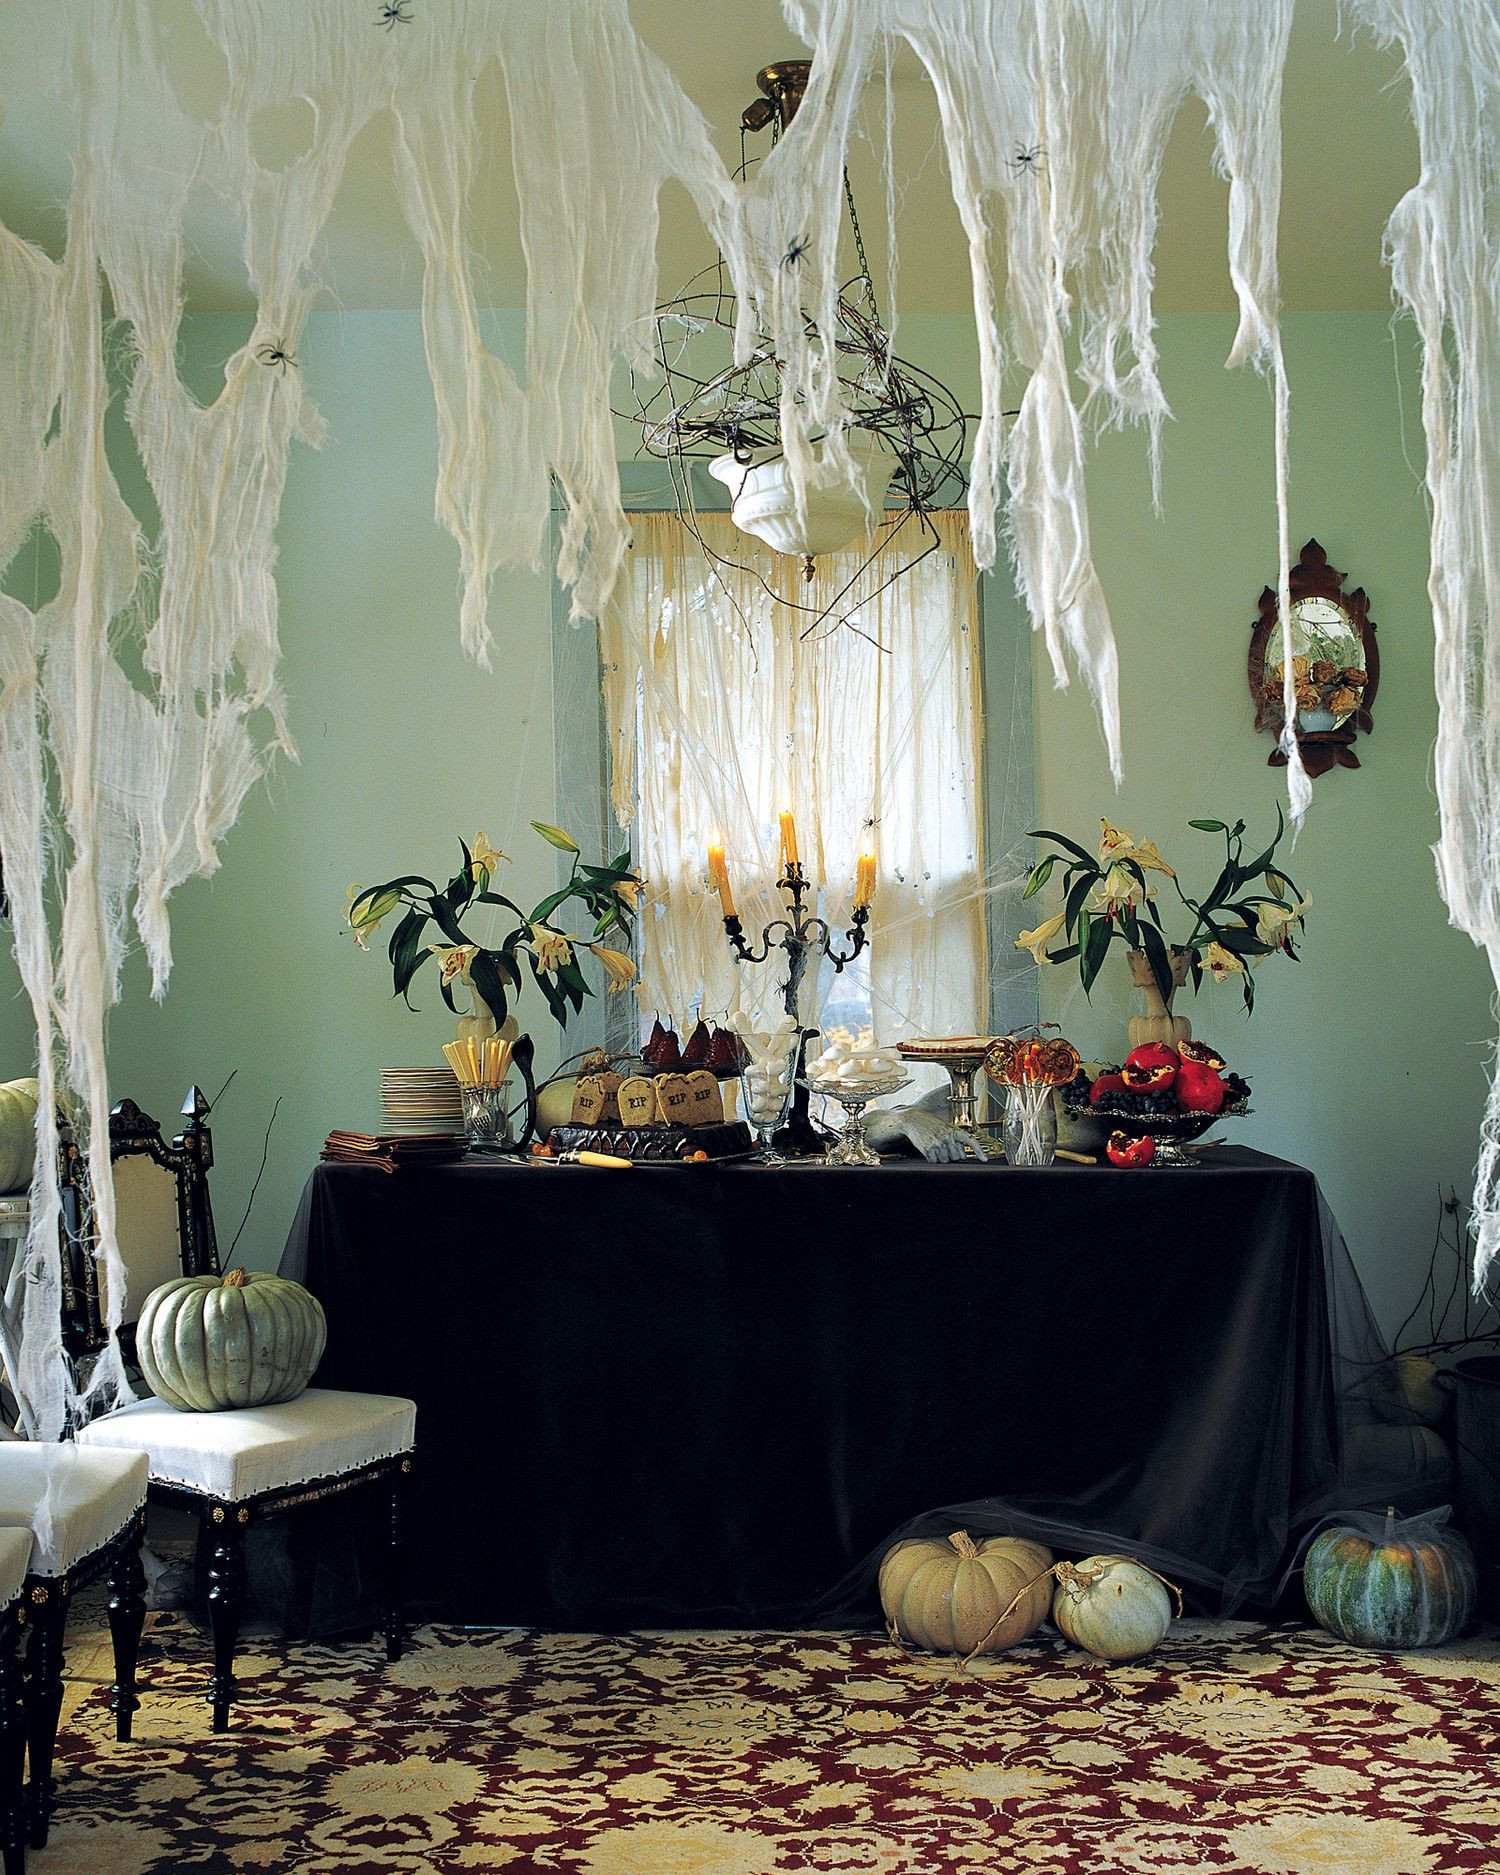 Cheap Indoor Halloween Decorations
 20 of Our Best Indoor Halloween Decorations